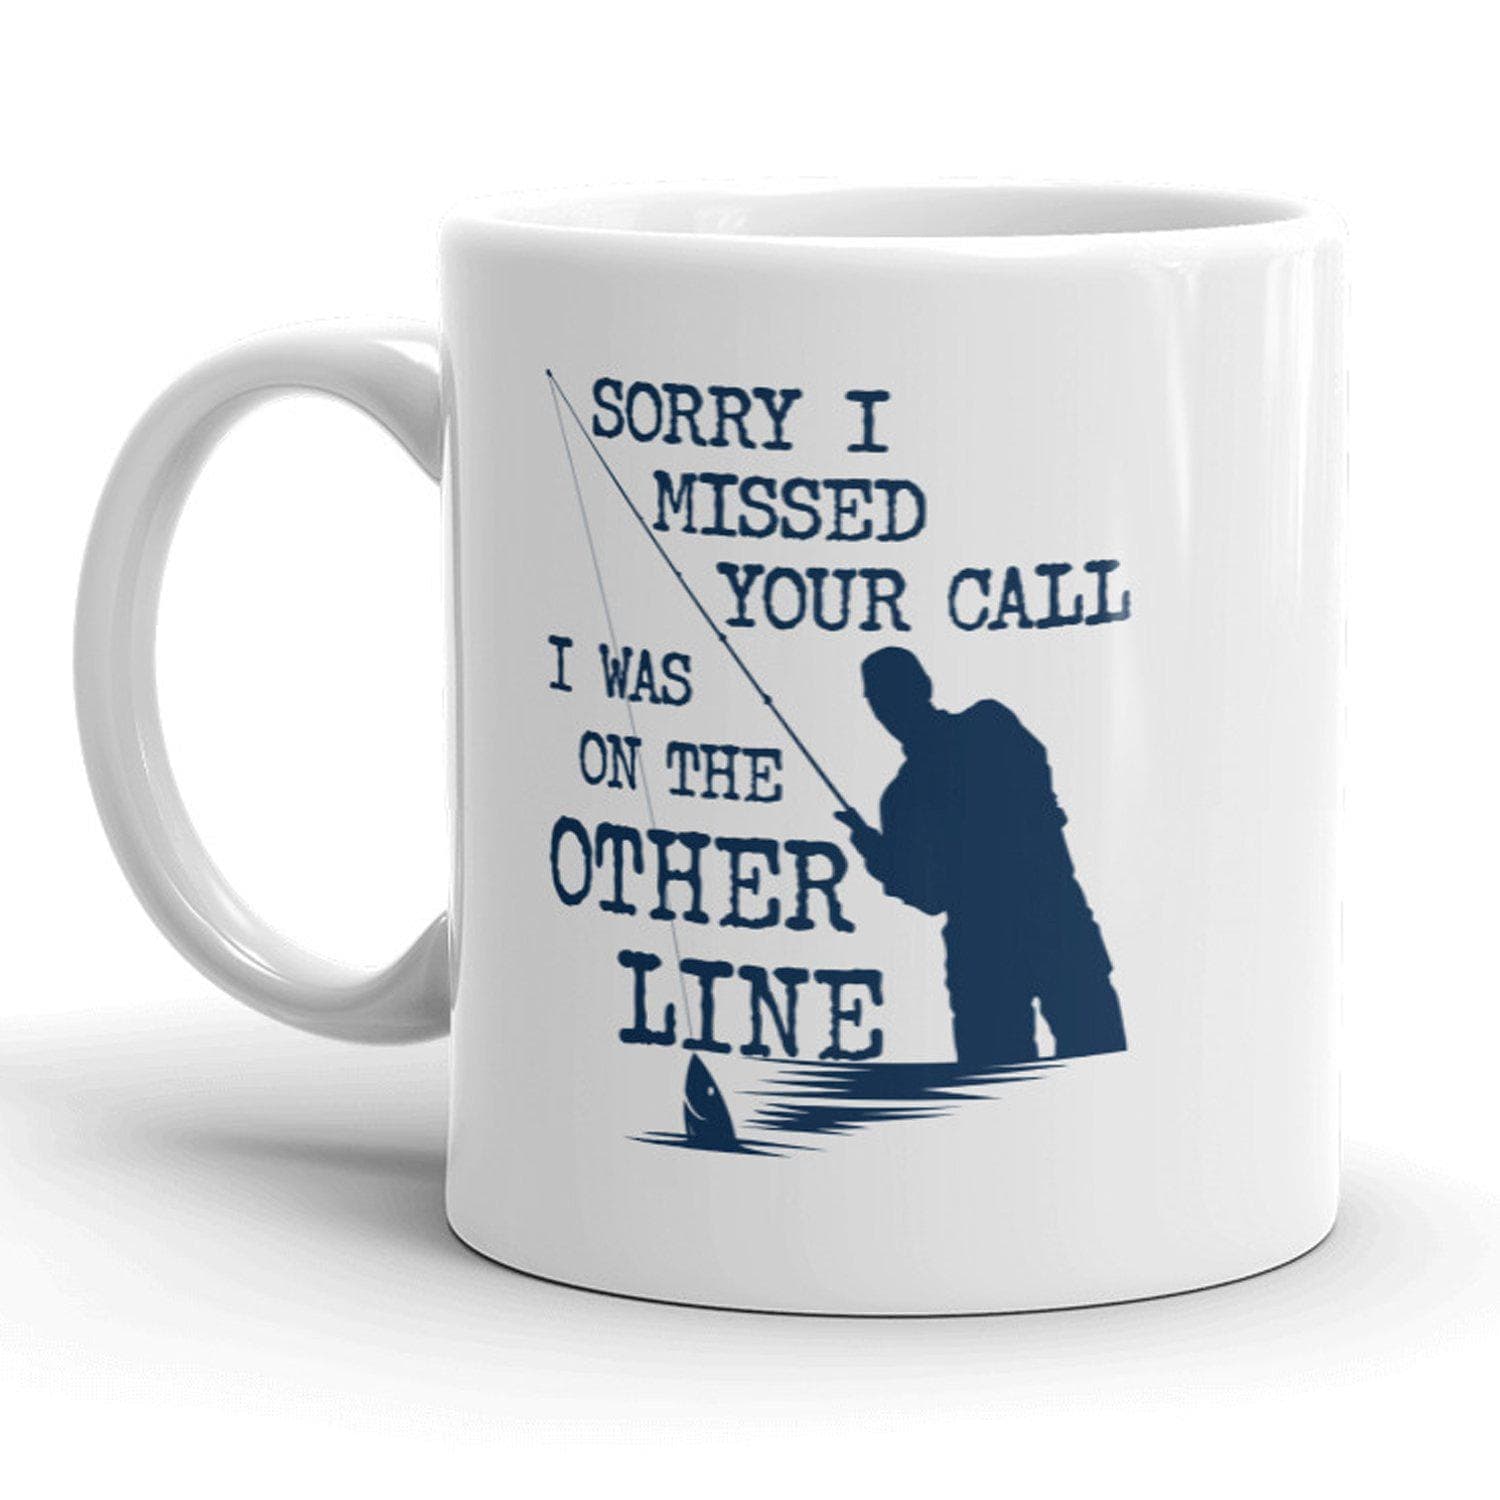 Born To Fish Forced To Work Mug Fishing Coffee Mug, Funny Gift For Dad,  Husband Or Brother On Father's Day., Ceramic Novelty Coffee Mug, Tea Cup,  Gift